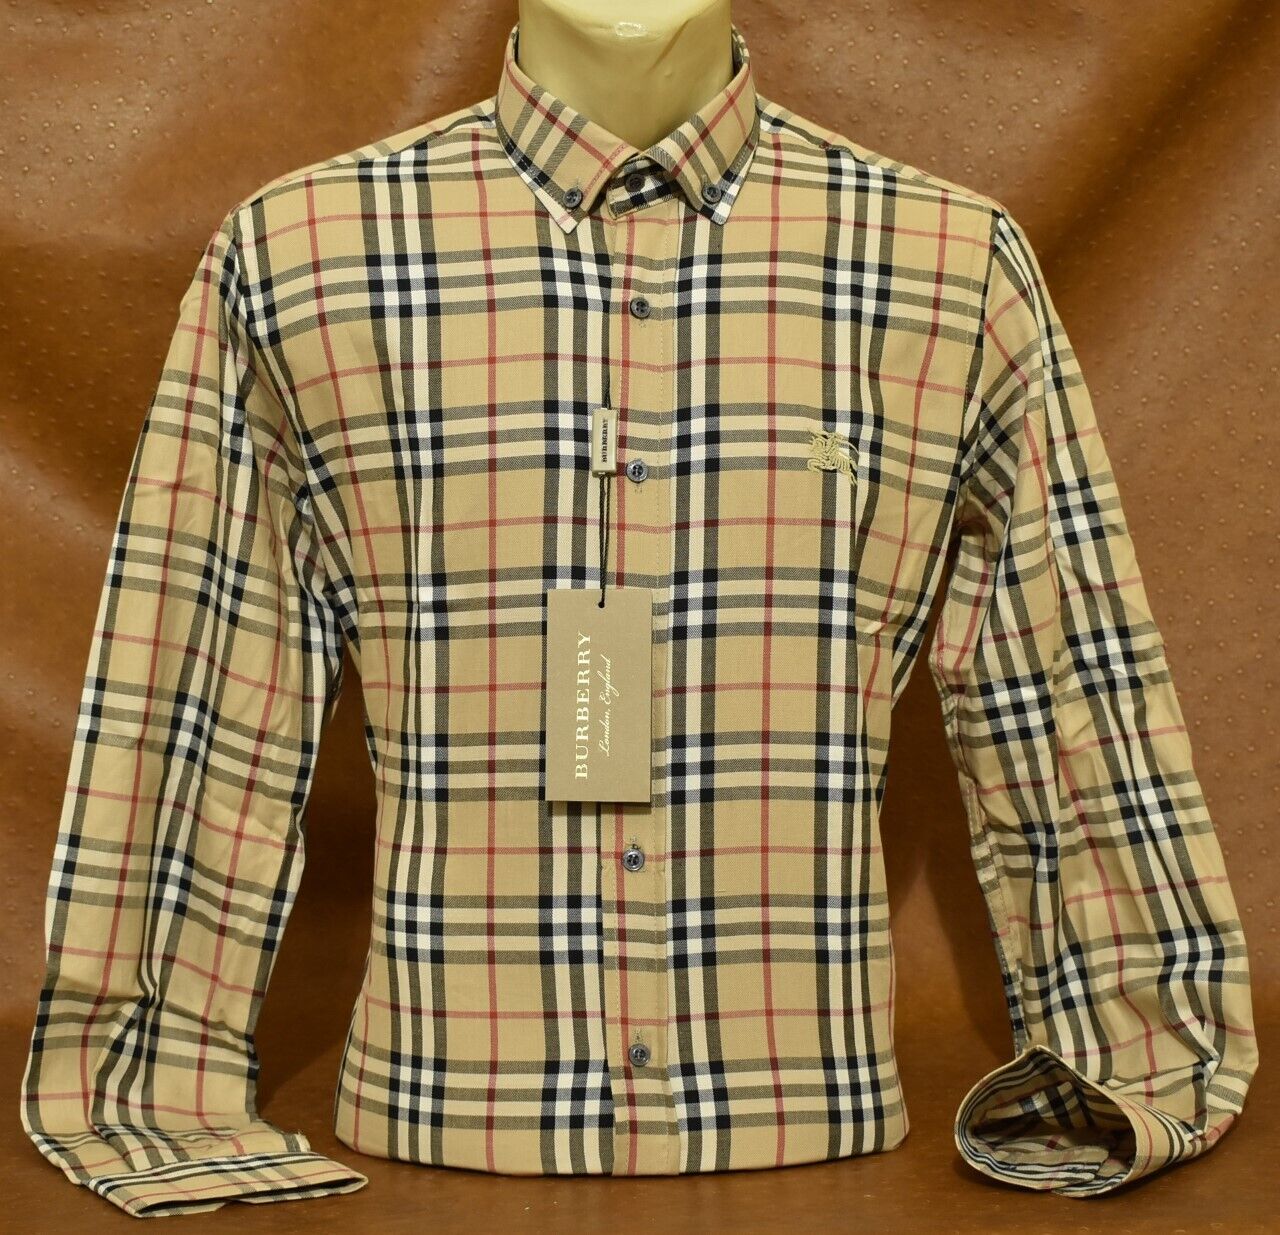 NWT Brand New MEN'S BURBERRY Long Sleeve SHIRT Slim Fit Size Small to 2XL